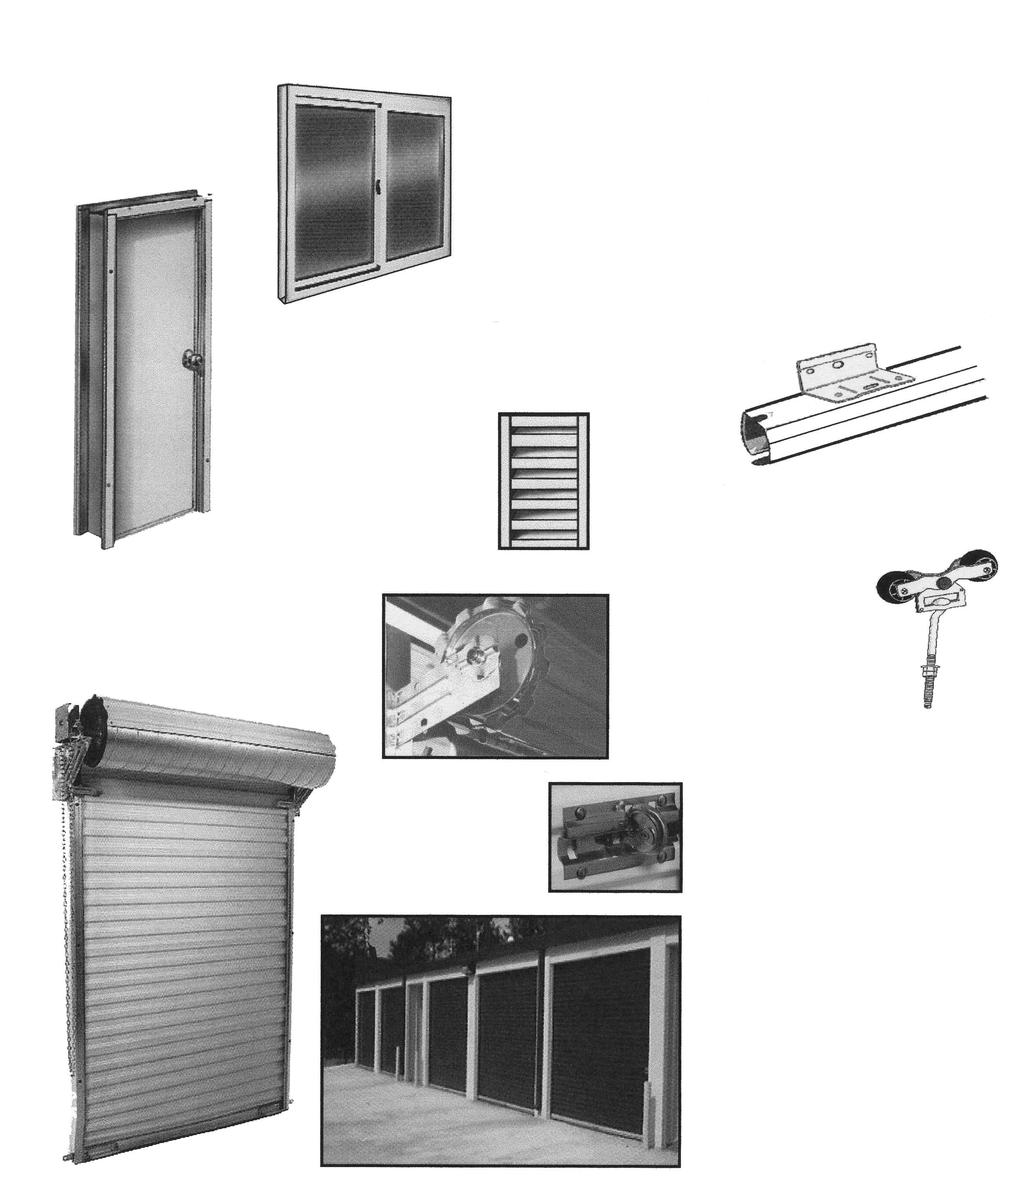 SERVING ALL YOUR BUILDING NEEDS ASK ABOUT THESE ADDITIONAL PRODUCTS STEEL JOIST & METAL DECK FRAMED WINDOWS 3618 3636 3625 4425 3070 & 3068 WALK DOORS WALL LOUVERS SLIDING DOORS TRACKS & RAILS MOTOR